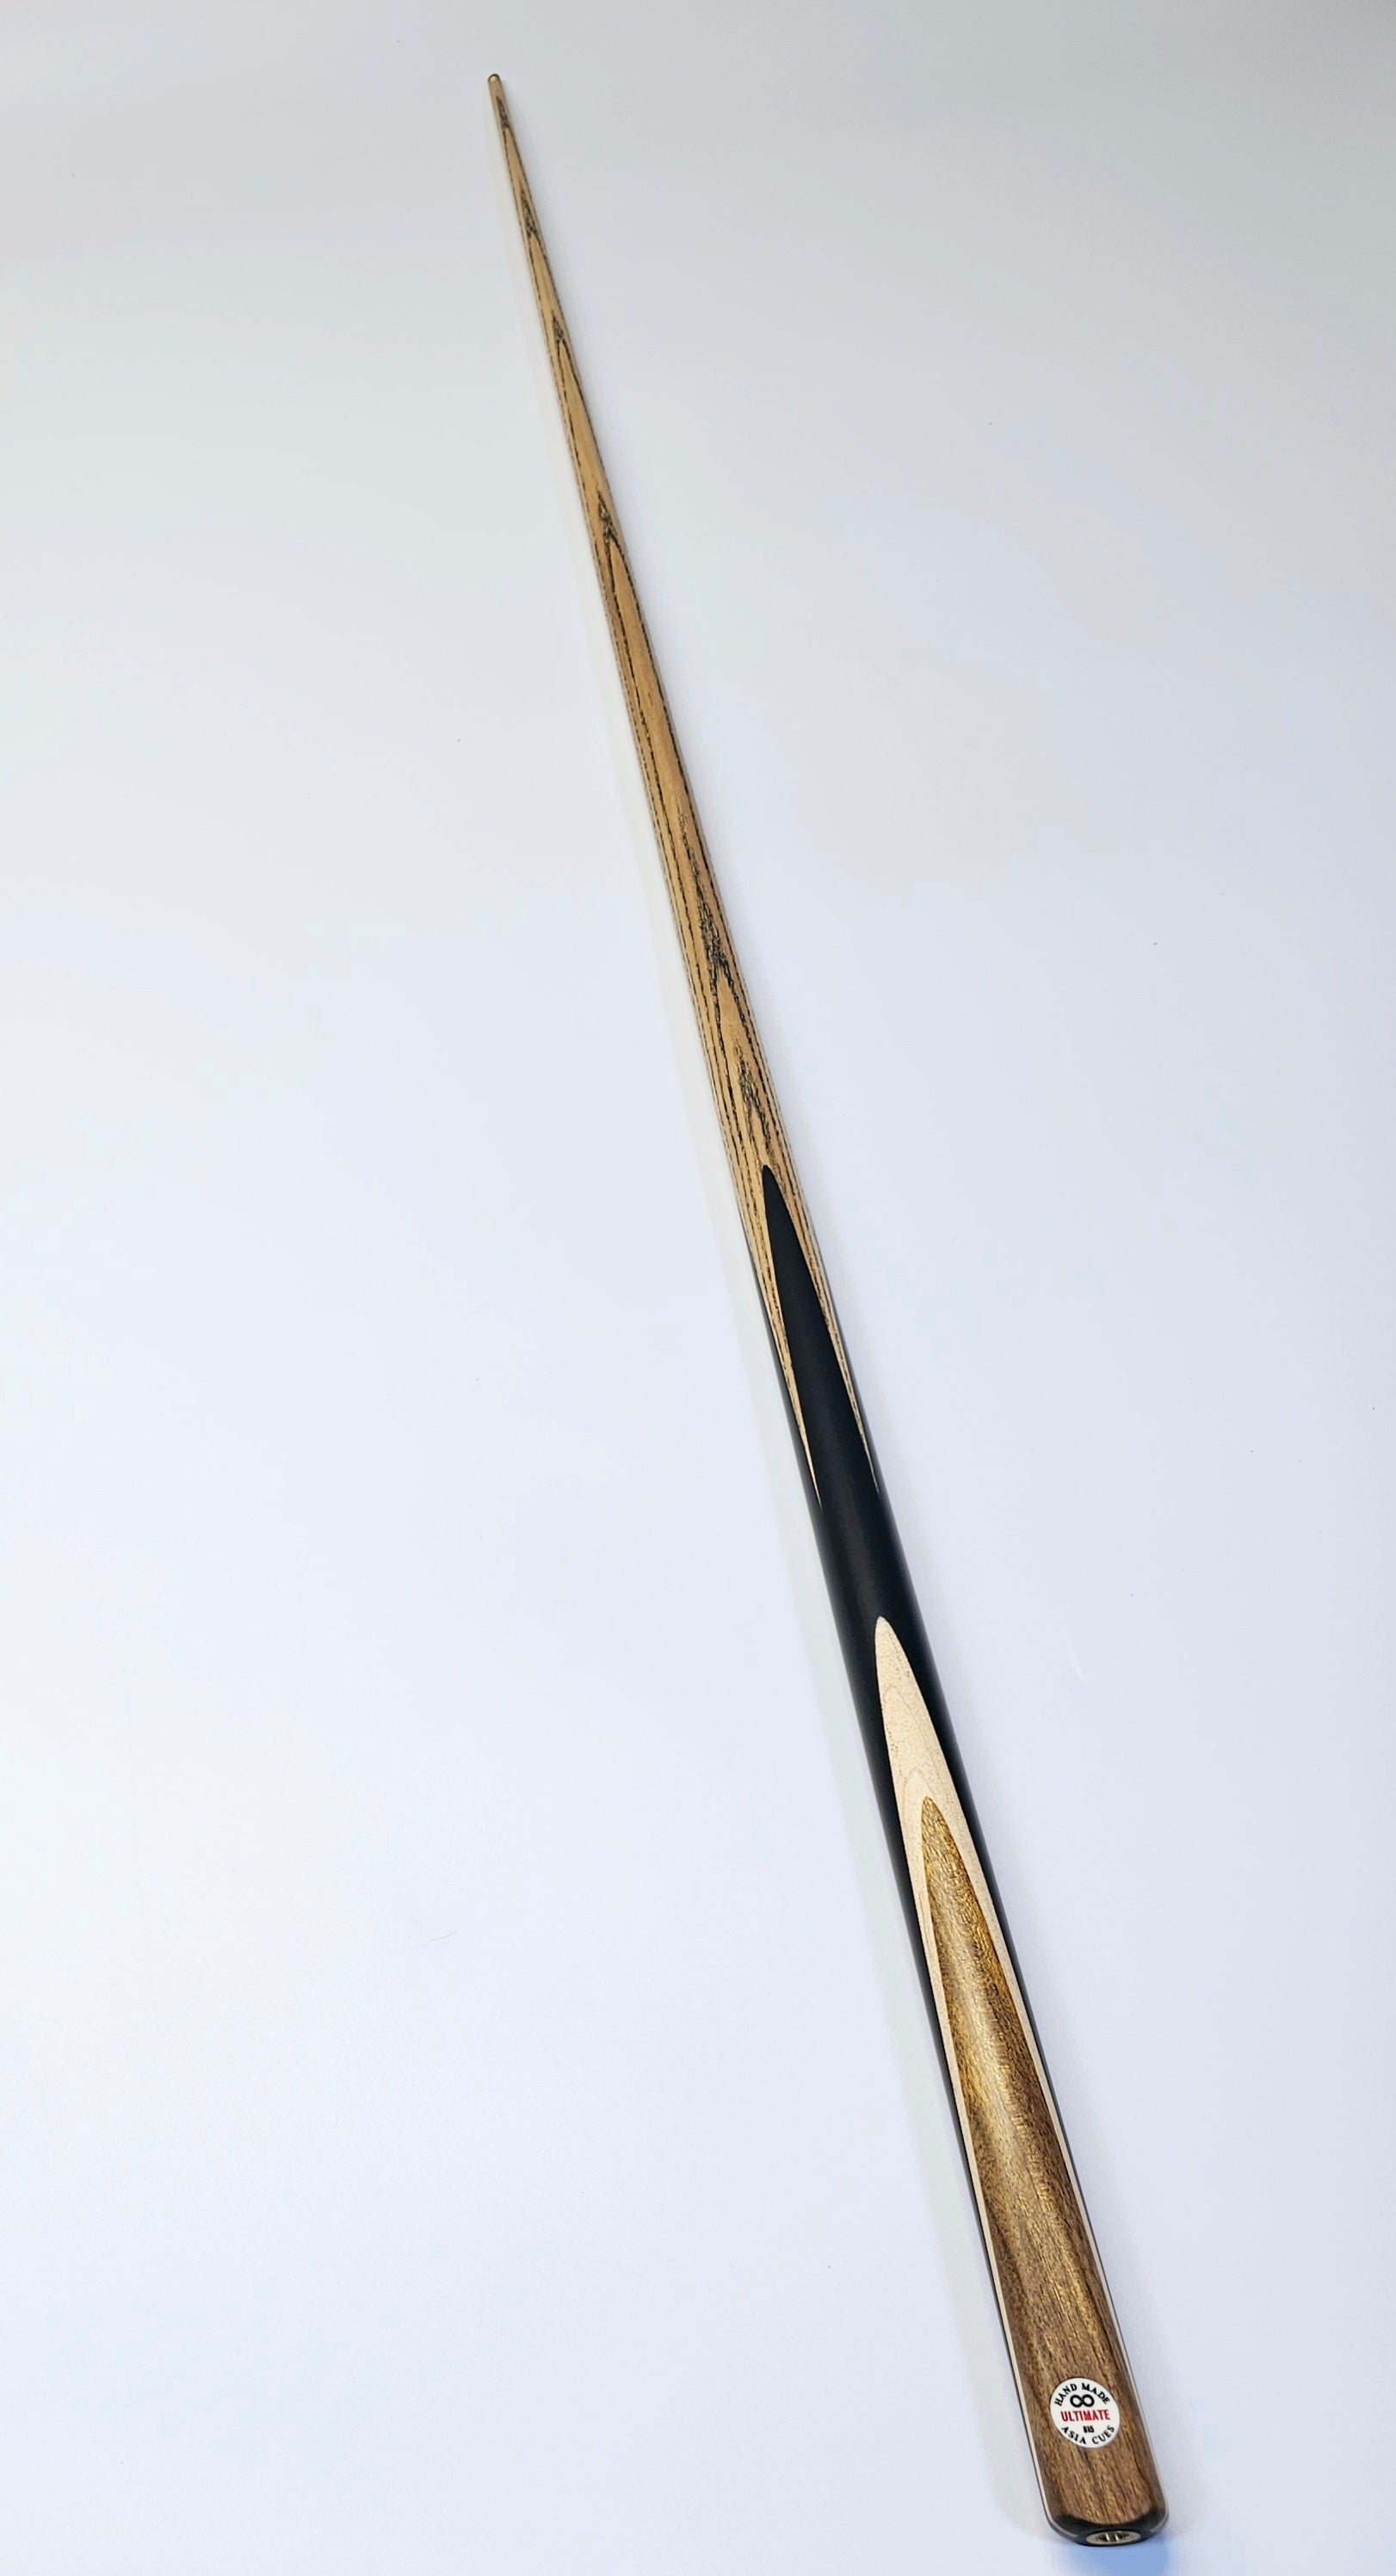 Asia Cues Ultimate No.815  - One Piece Pool Cue 8.7mm Tip, 17oz, 57.5"